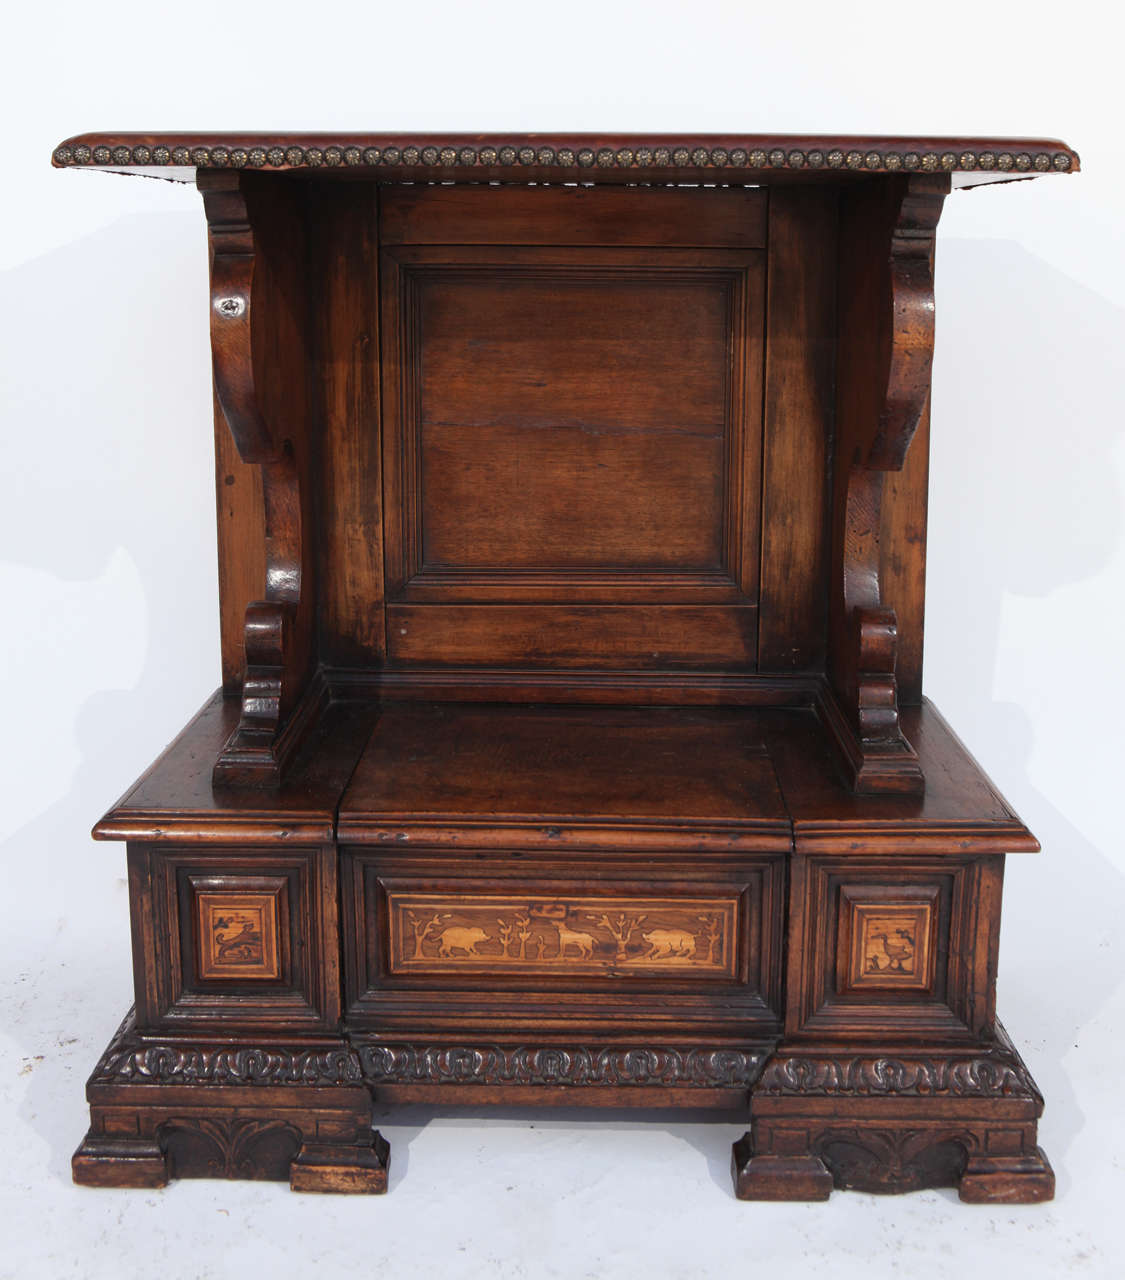 18th century Italian walnut cabinet with flip drawer and inlaid animal scene. The leather top with the nailheads is not original.